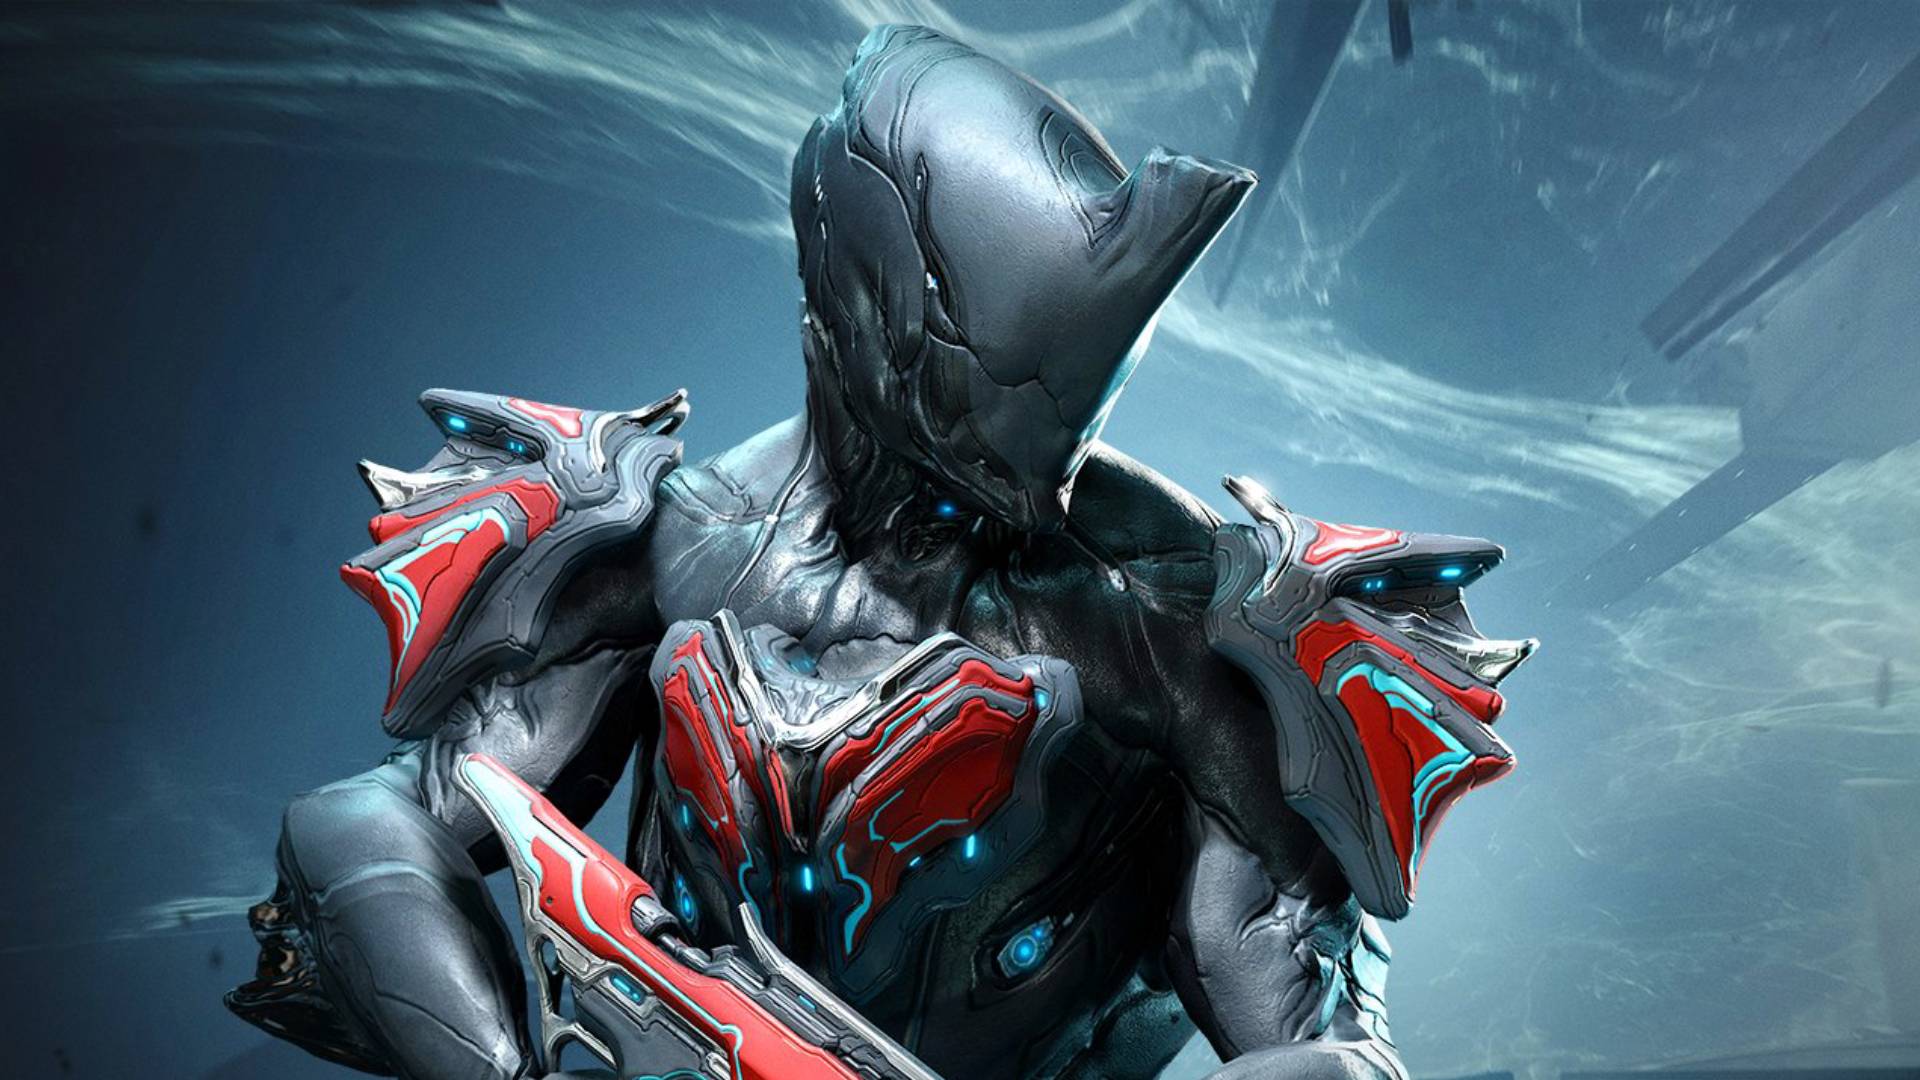 Everyone will get Warframe cross save, but fixes are required first